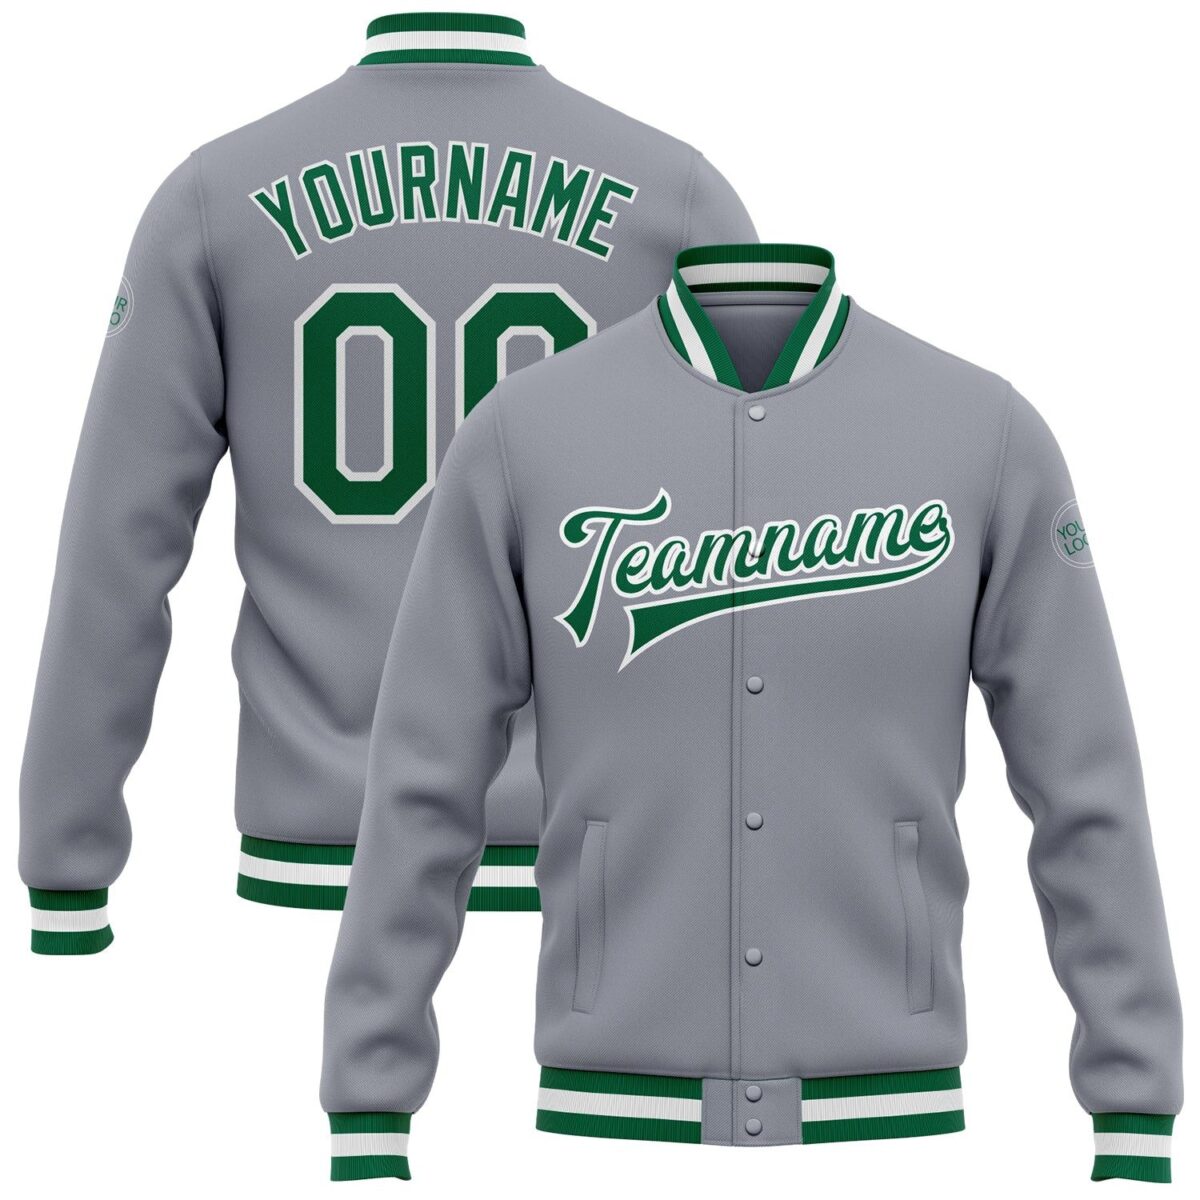 Baseball Student College Jackets with Grey & Green 1